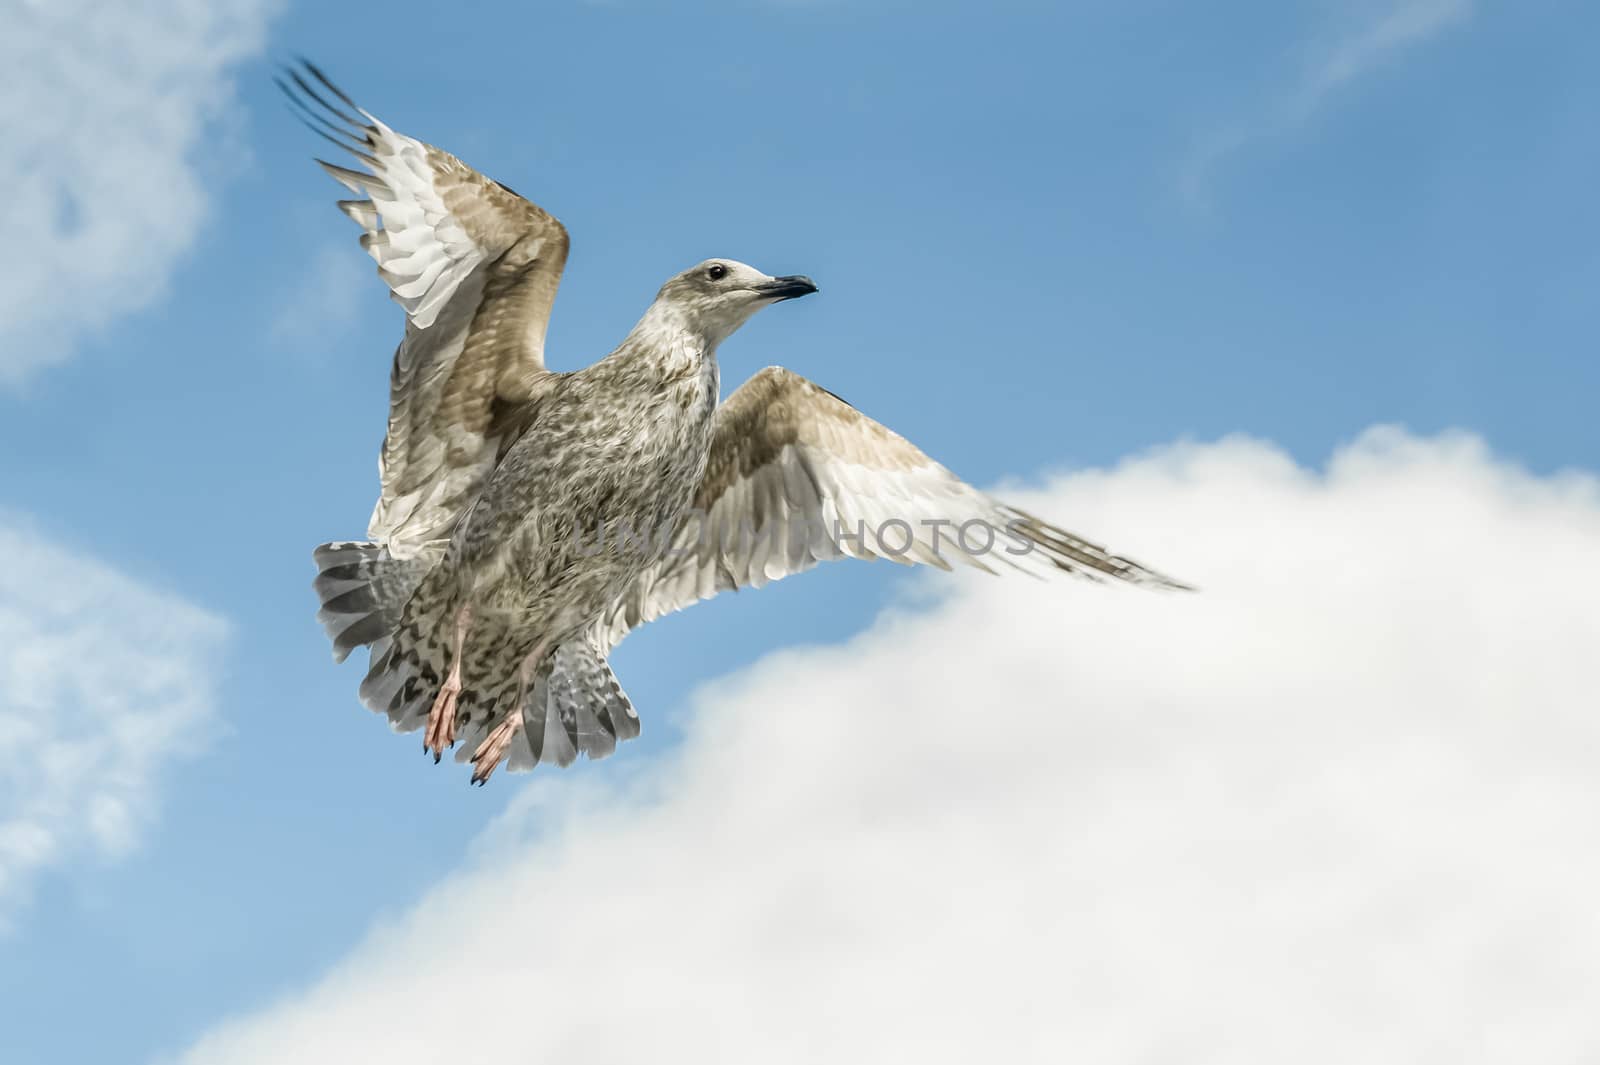 wingspan of a fledgling seagull flying into a blue cloudy sky